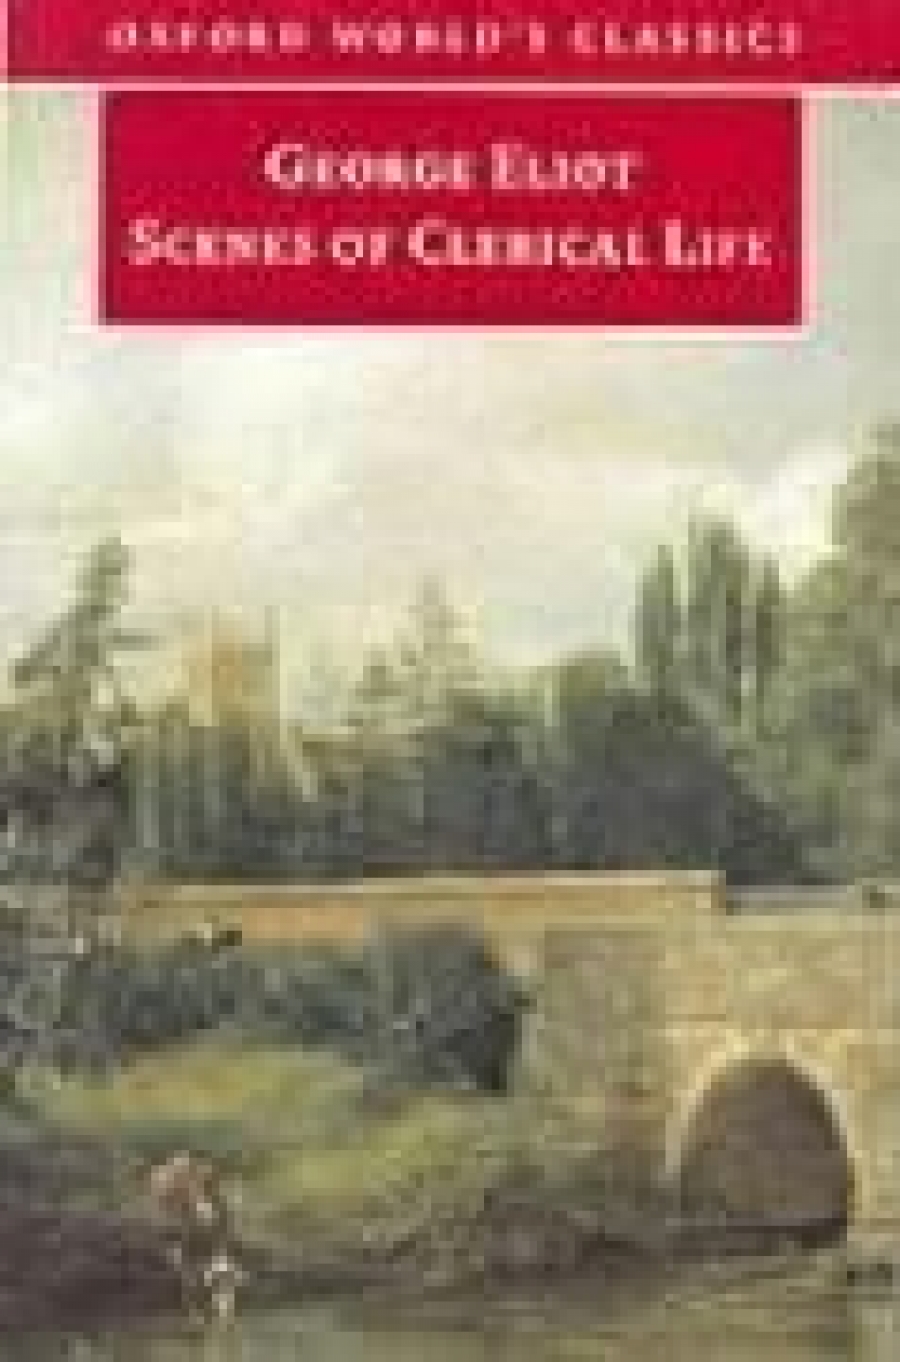 Eliot G. Owc eliot:scenes of clerical life 